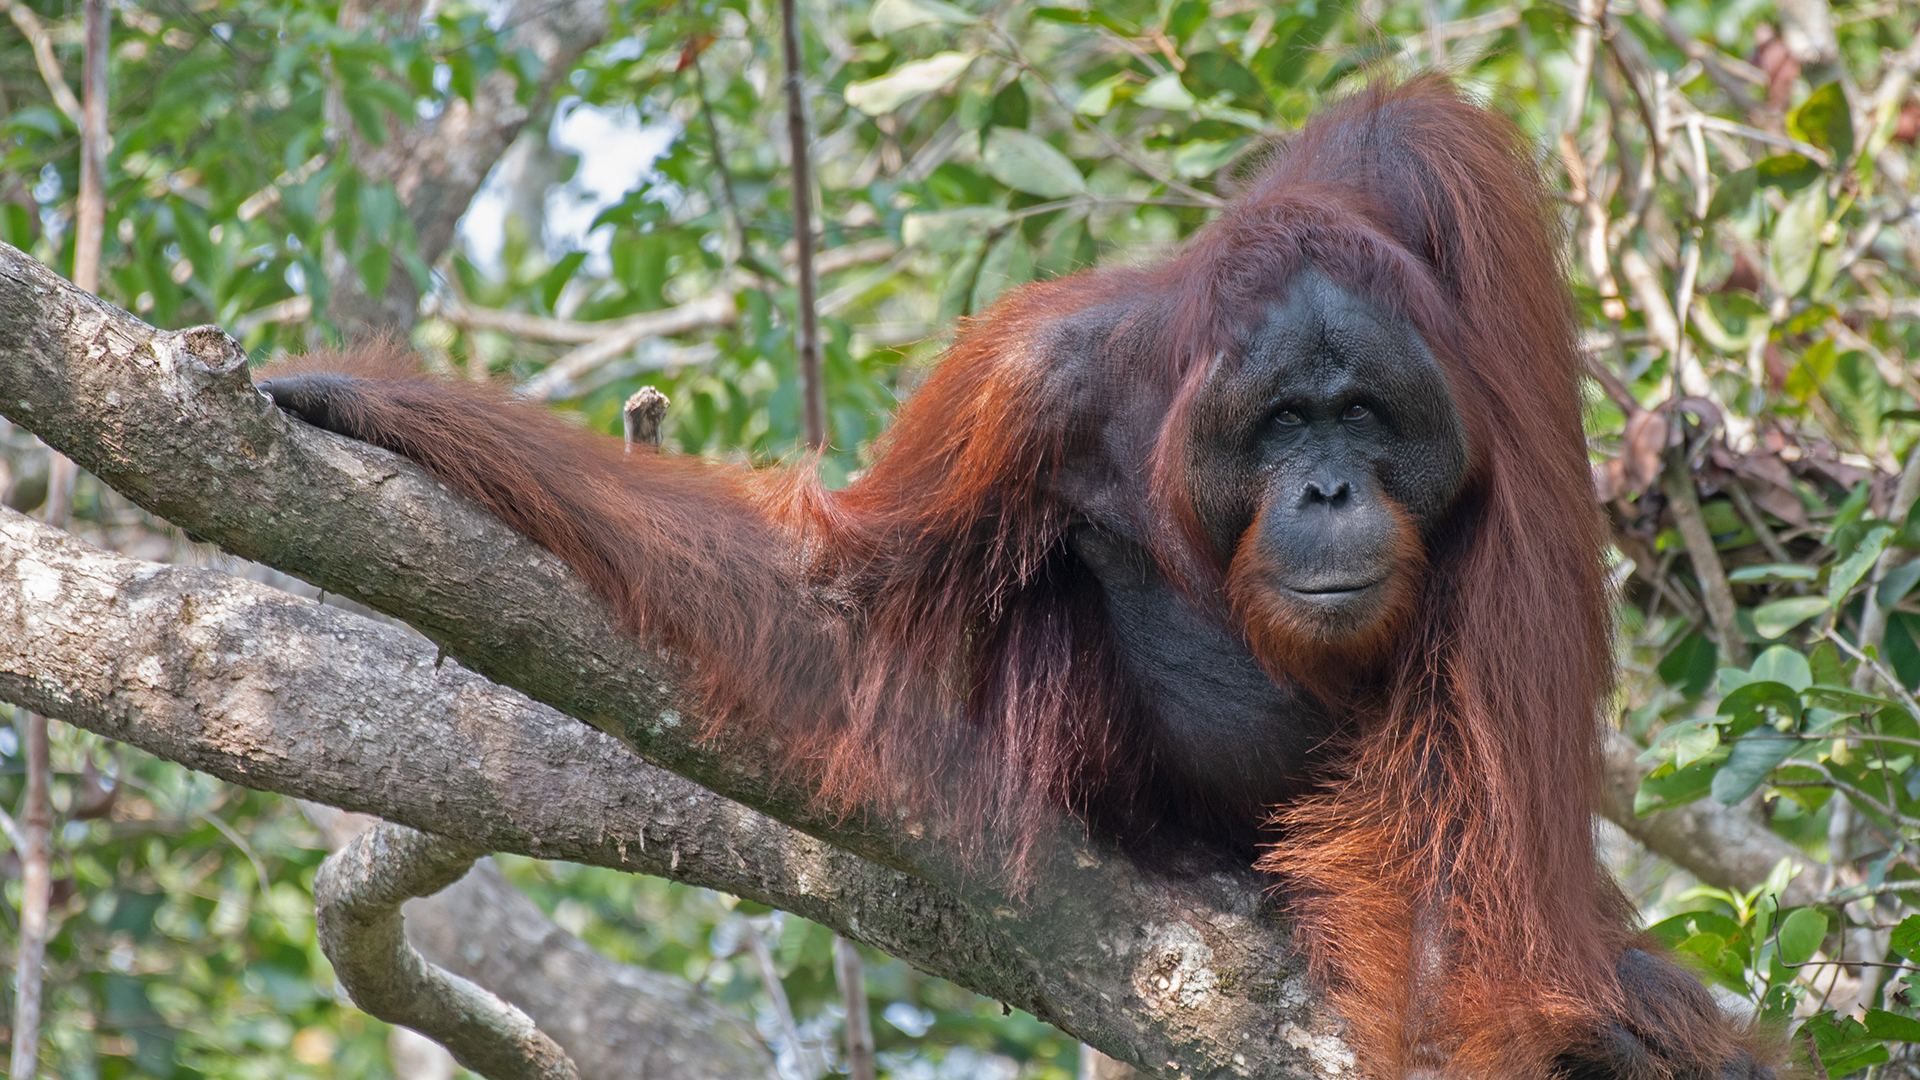 An adult orangutan sits on a tree branch with one arm outstretched